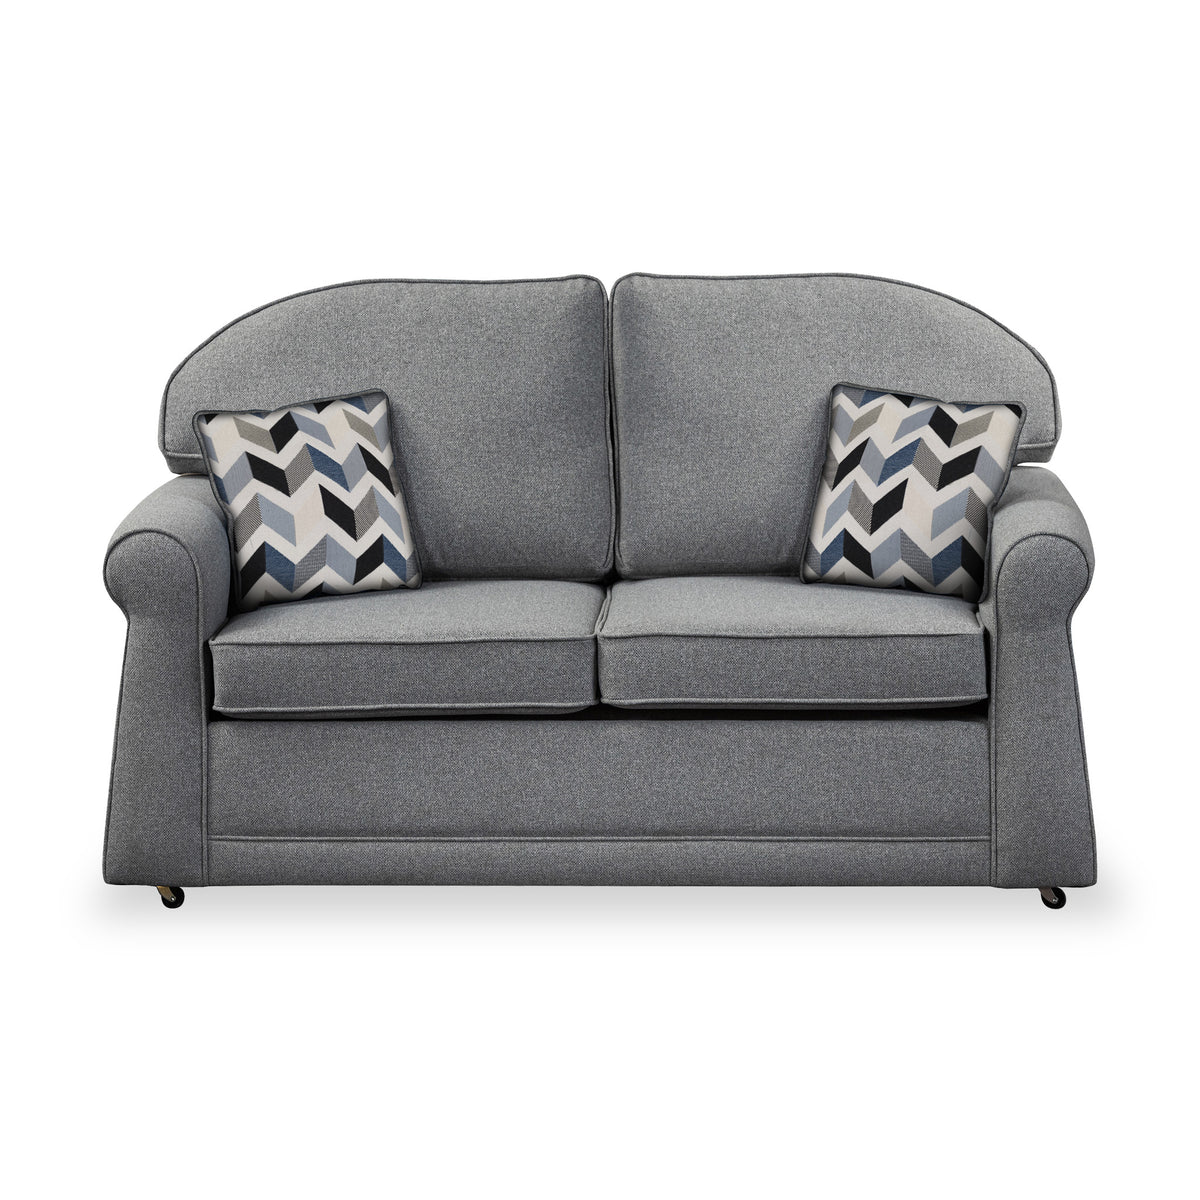 Croxdon Silver Faux Linen 2 Seater Sofabed with Denim Scatter Cushions from Roseland Furniture